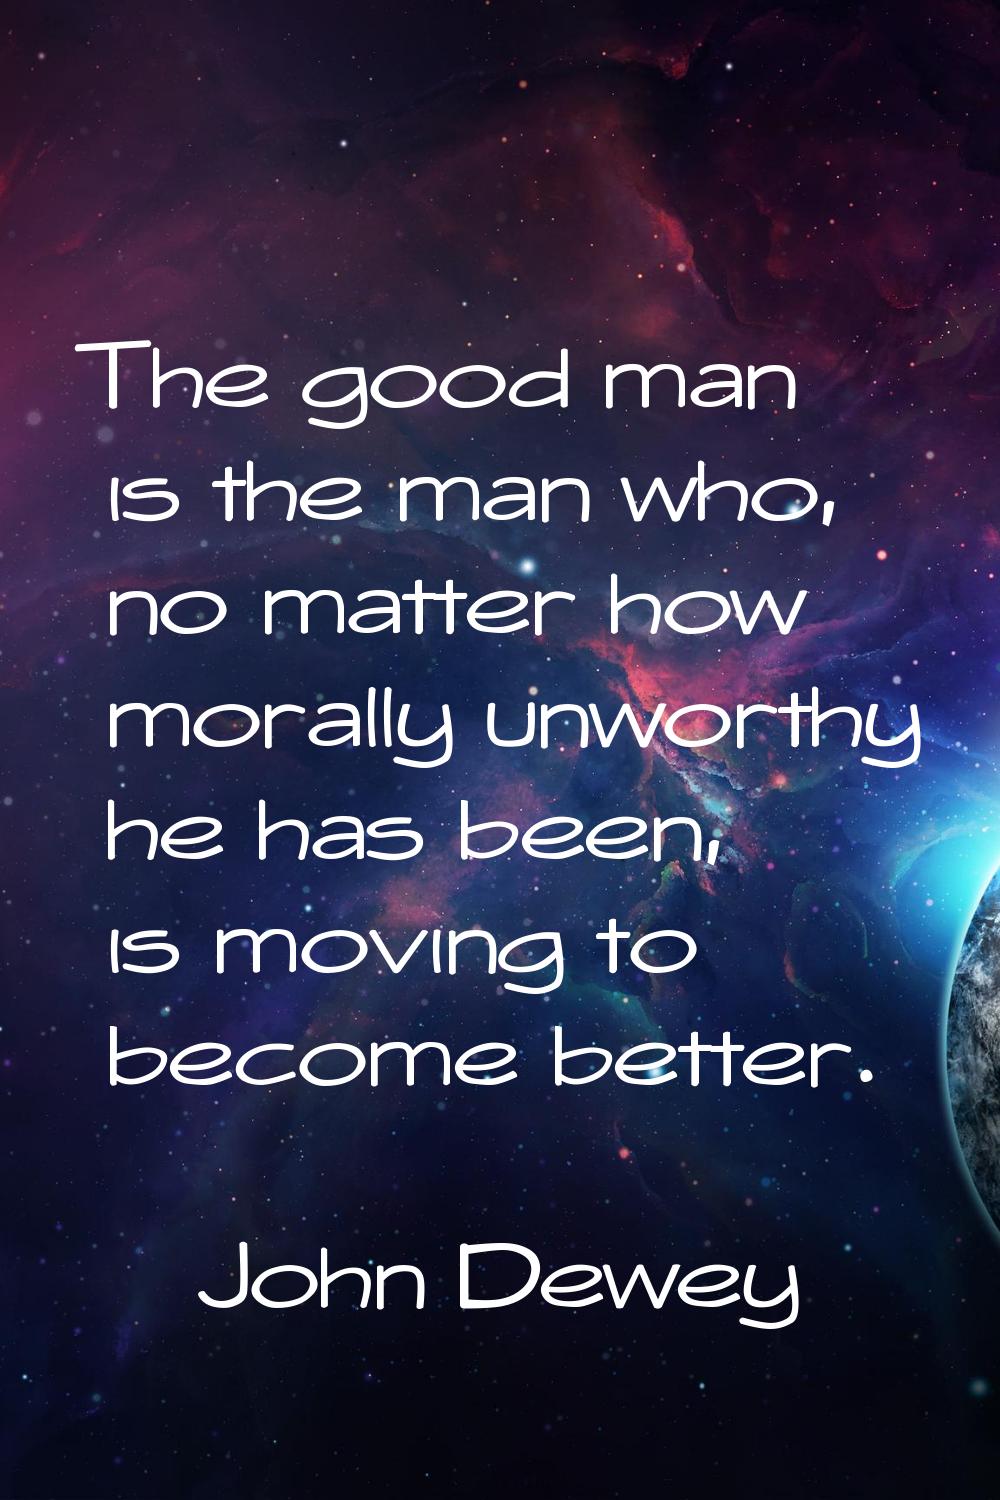 The good man is the man who, no matter how morally unworthy he has been, is moving to become better